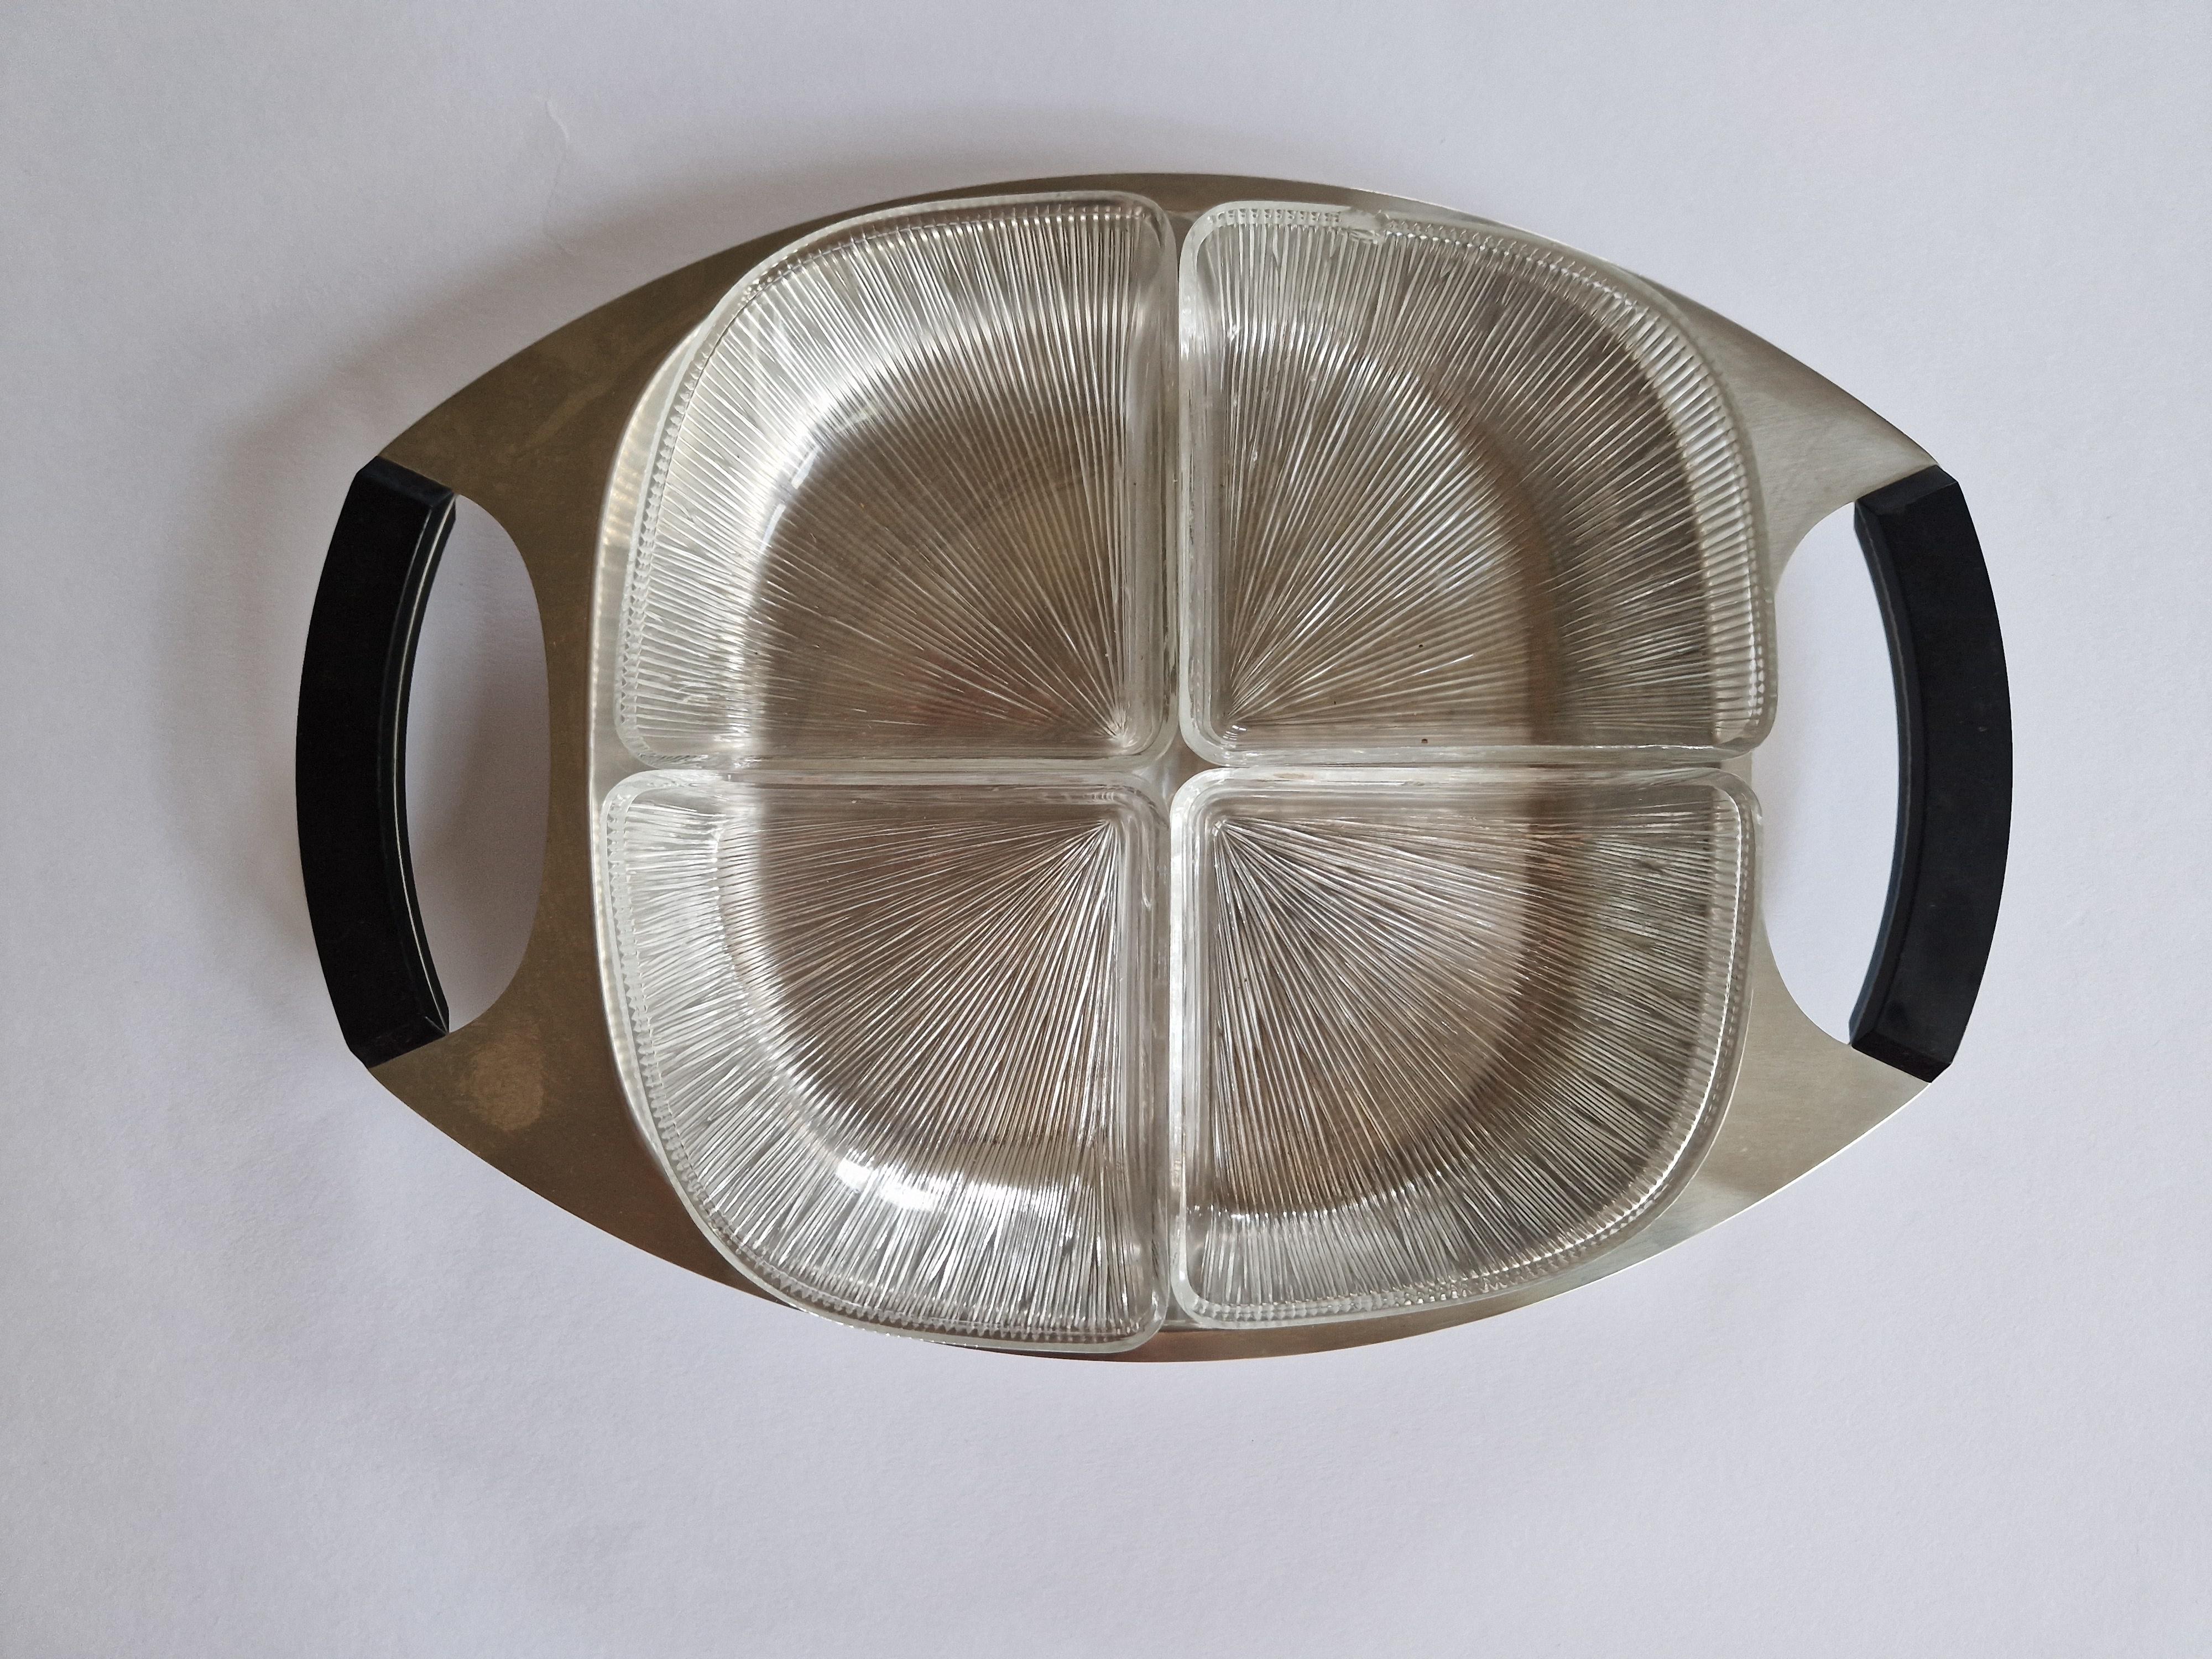 Late 20th Century Midcentury Serving Plate Stainless Steel and Glass Cromargan, Germany, 1970s For Sale